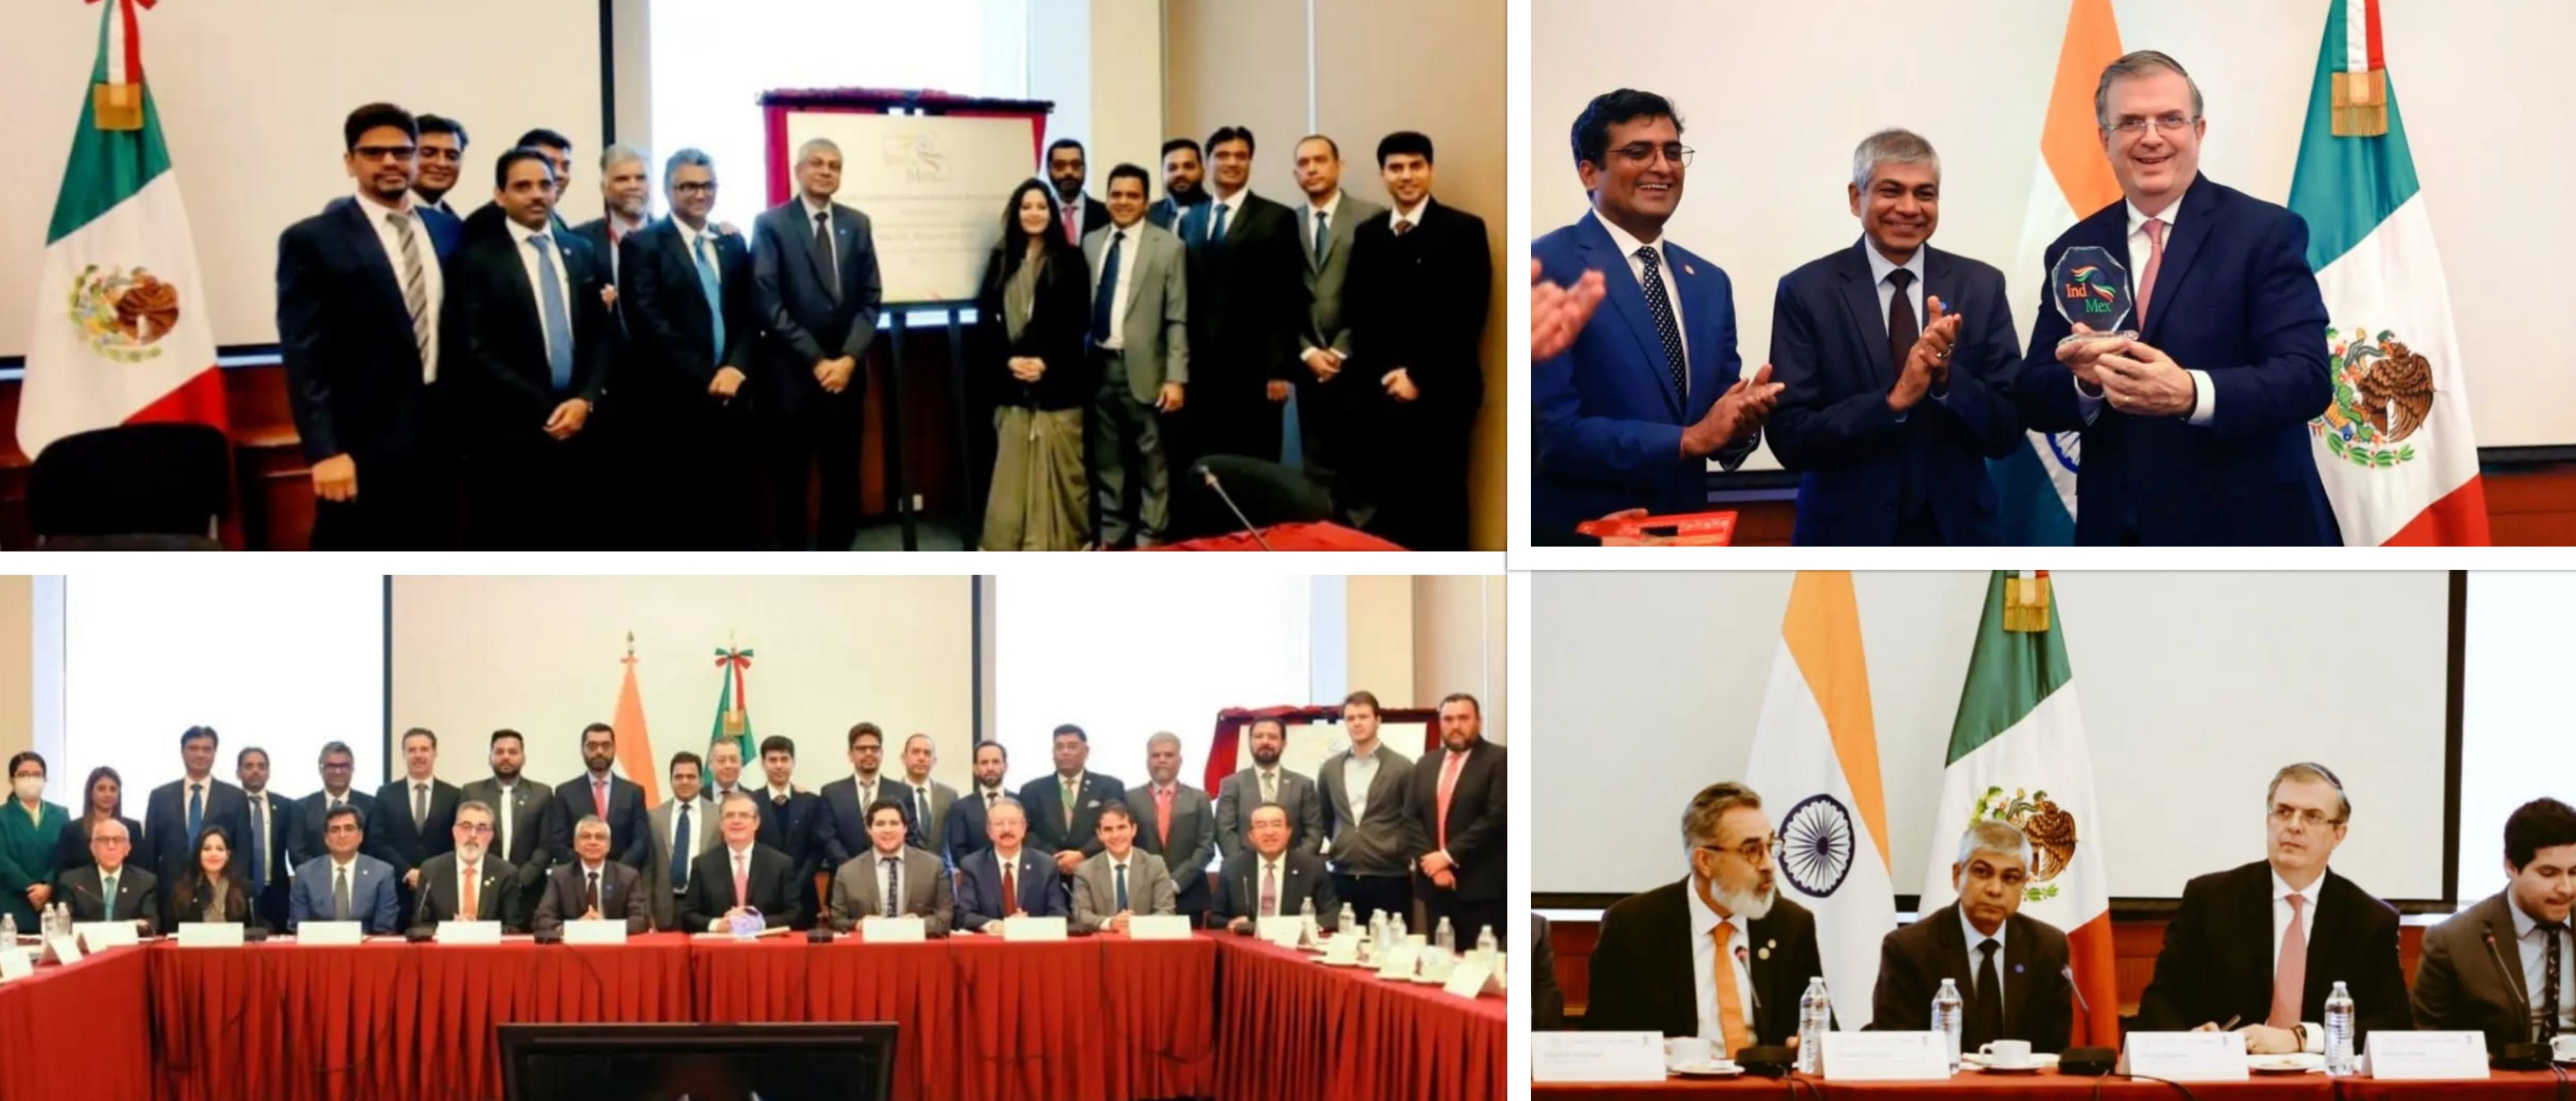  <div style="fcolor: #fff; font-weight: 600; font-size: 1.5em;">
<p style="font-size: 13.8px;">We saw another achievement in India-Mexico Friendship with the launch of Trade & Commerce Council of India and Mexico (INDMEX). 

We thank H.E. Mr. Marcelo Ebrard for inaugurating the council. INDMEX will help our businesses grow together and create new partnerships in different sectors that will benefit both India and Mexico.
<br /><span style="text-align: center;">06 December 2022</span></p>
</div>